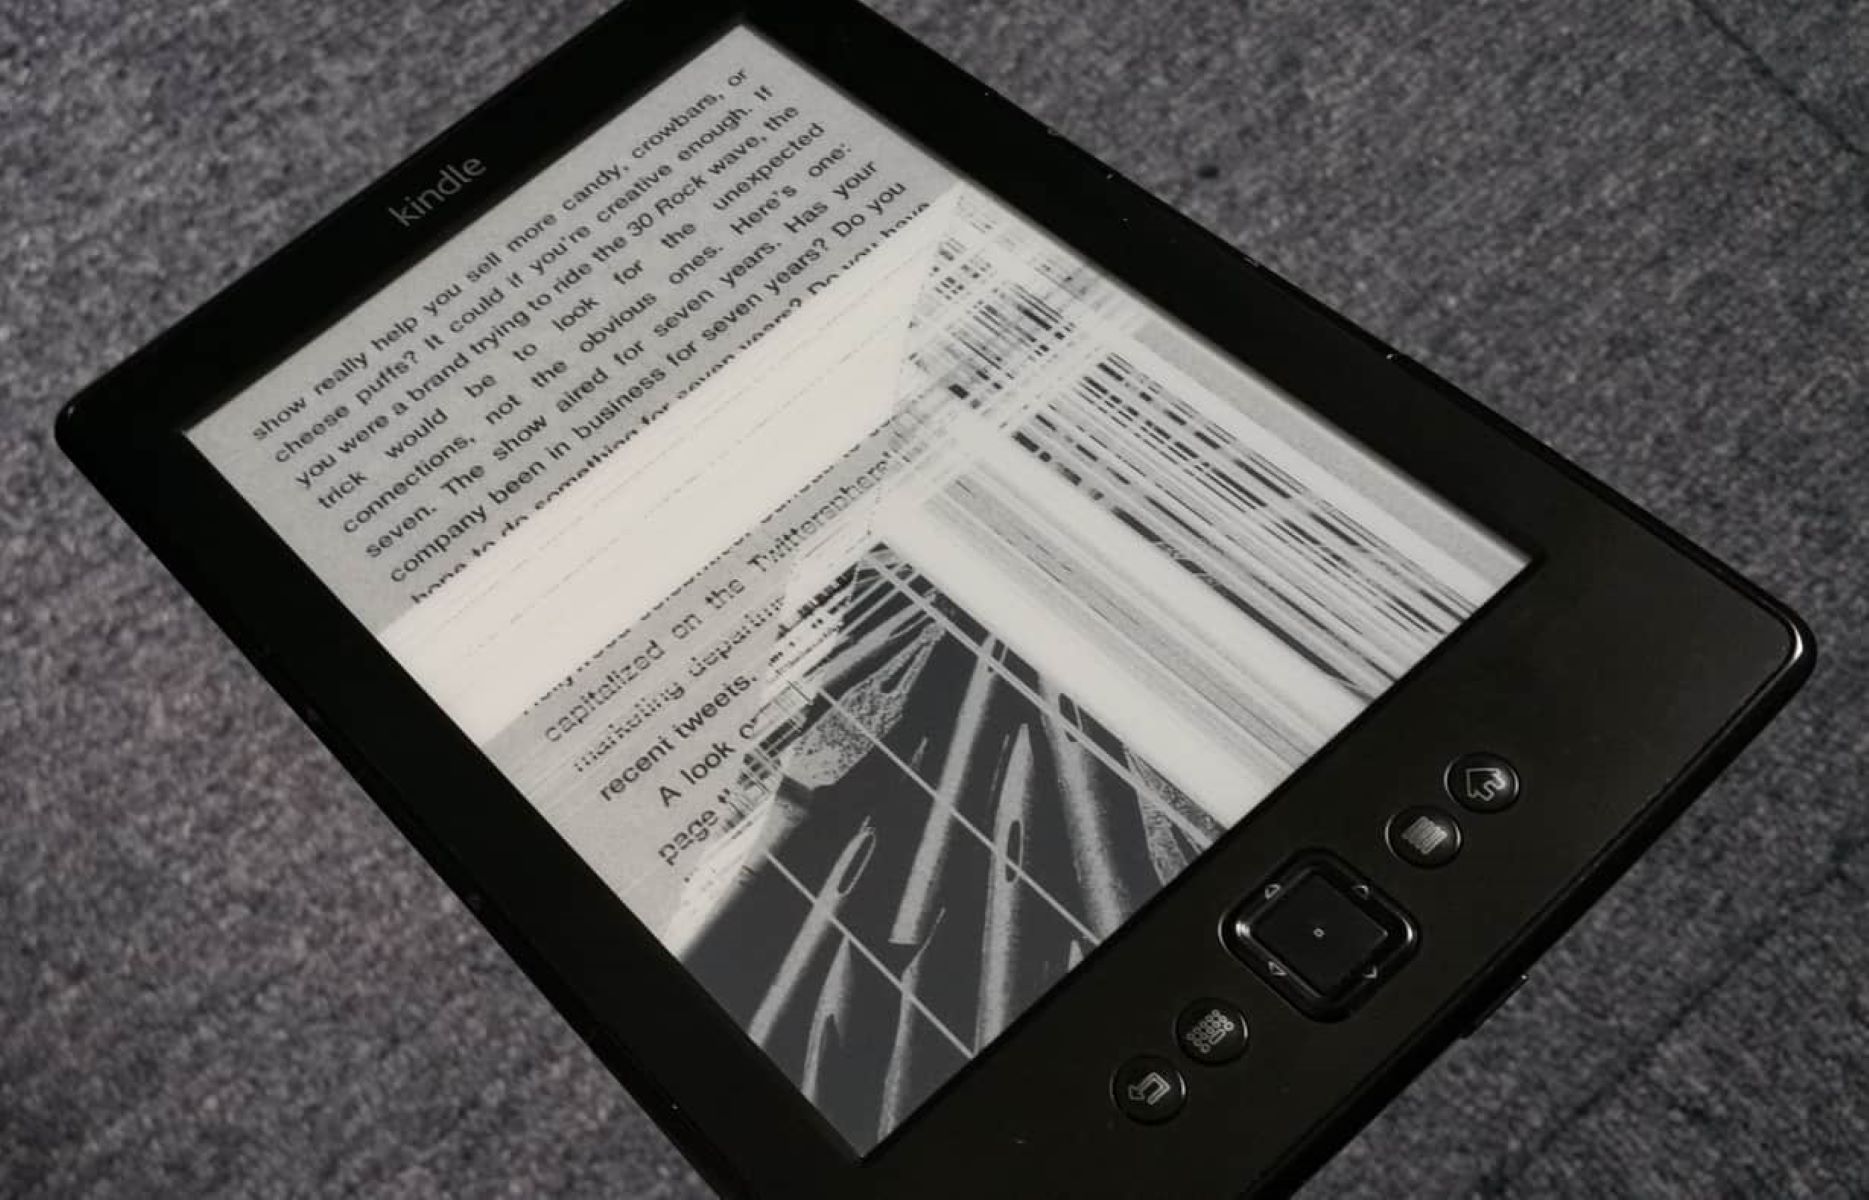 How To Fix A Frozen Kindle